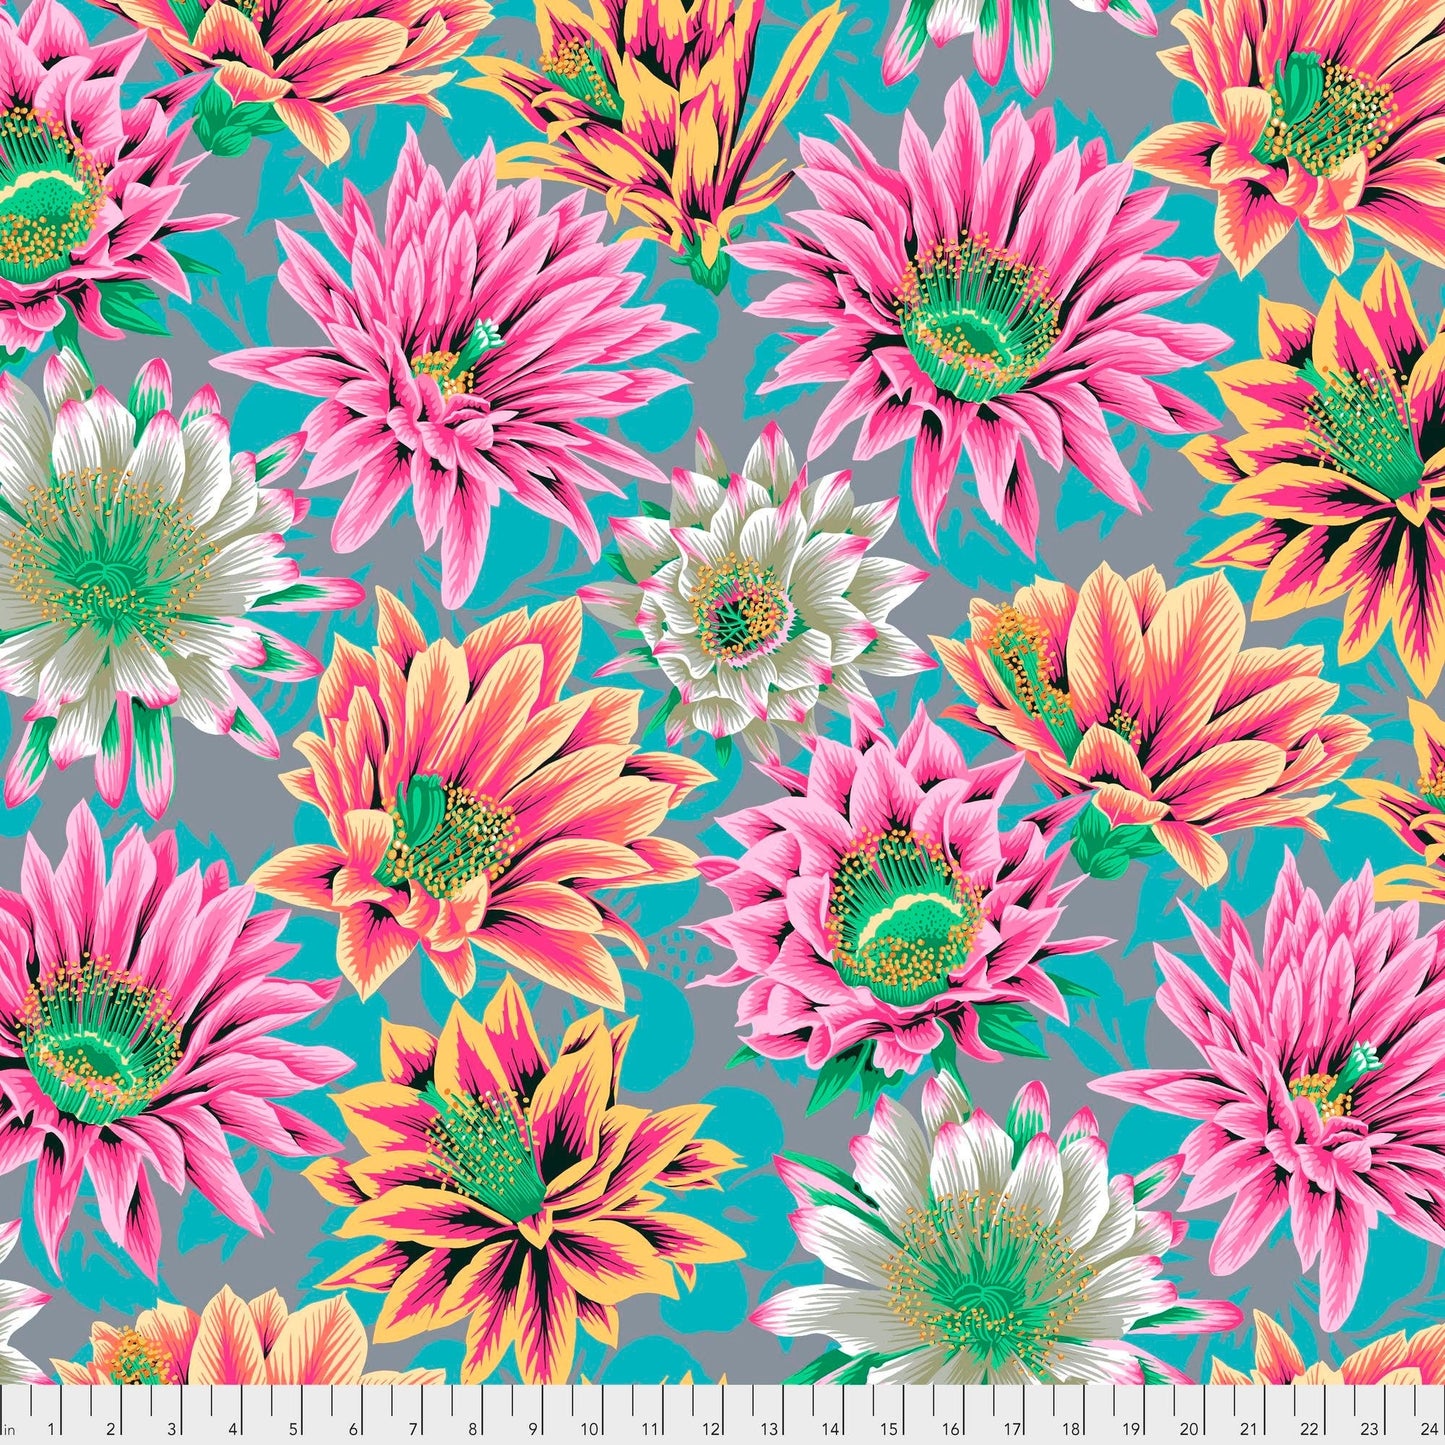 Kaffe Fassett CACTUS FLOWER Tawny PWPJ096 Philip Jacobs, Free Spirit Fabric, Quilt Fabric, Cotton Fabric, Quilting, Fabric By The Yard